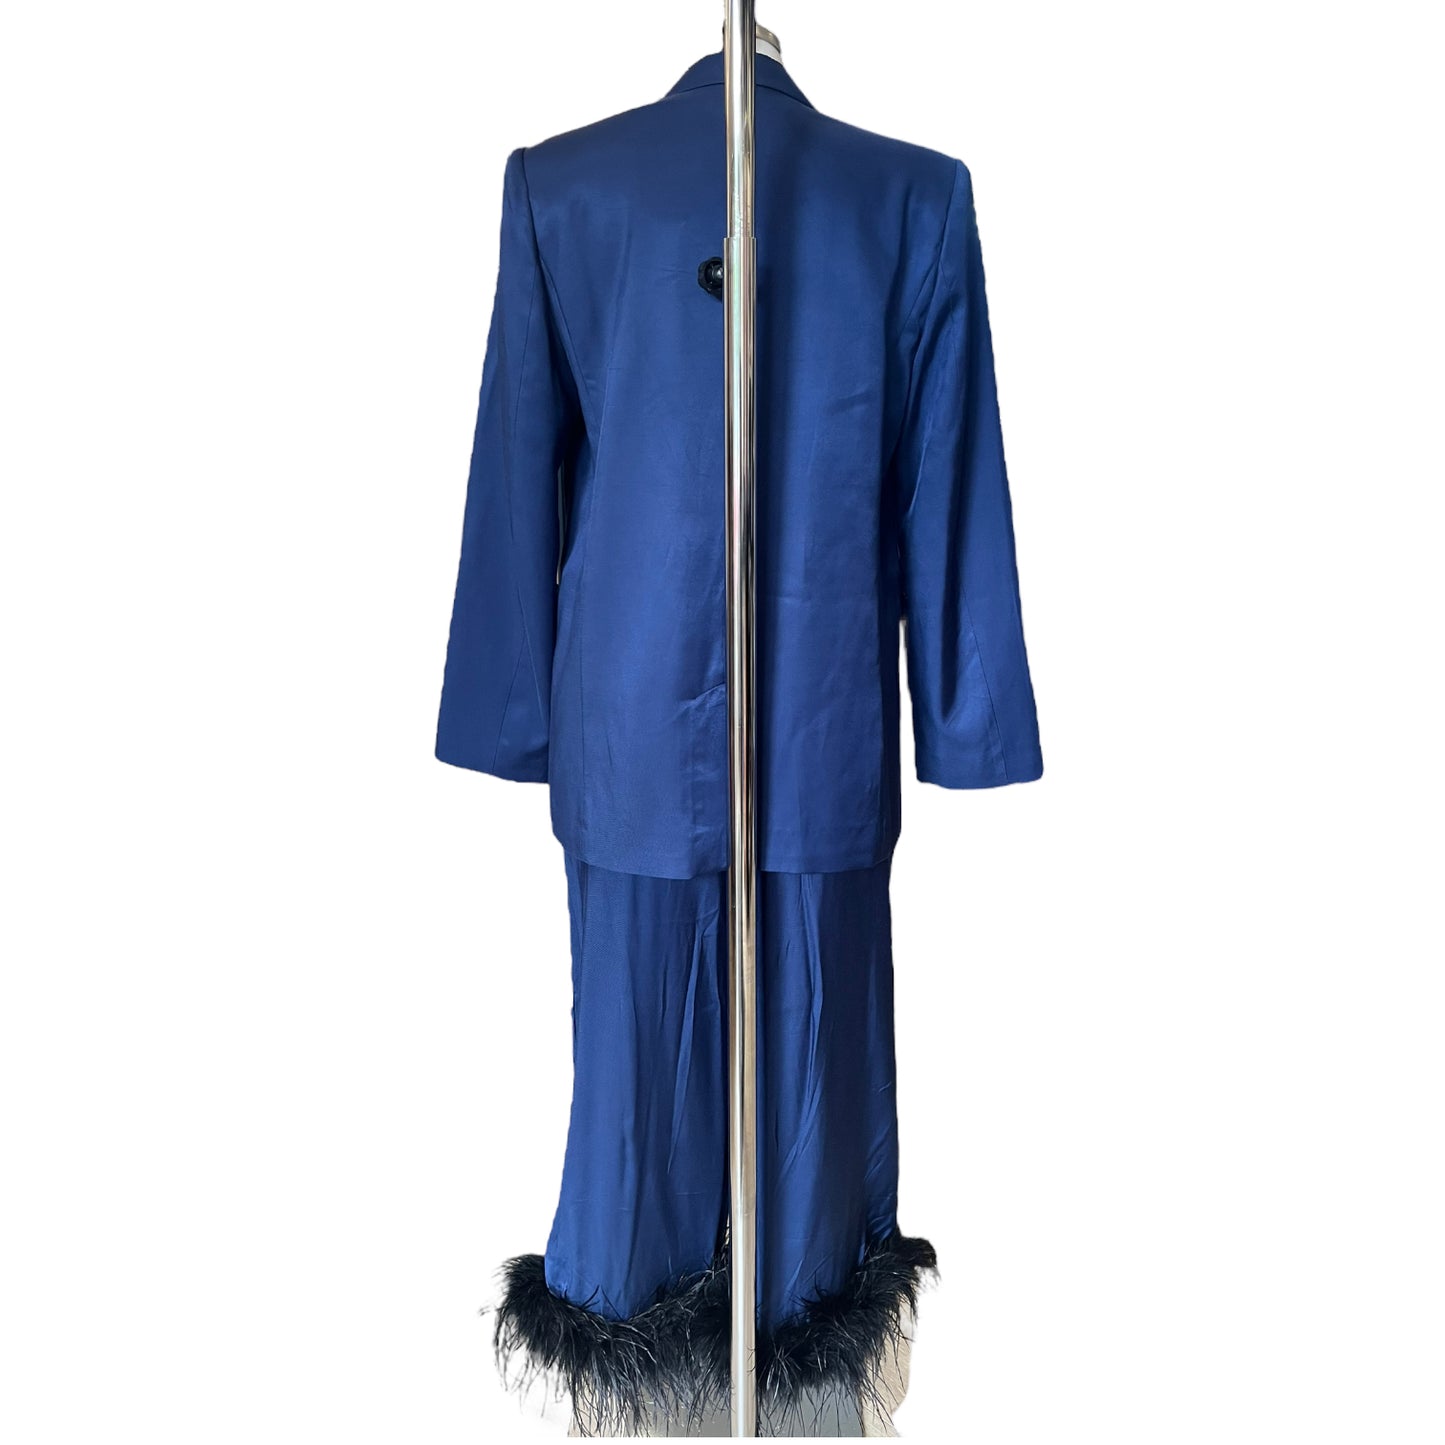 NEW Kitri Navy Trouser Suit with Feathers